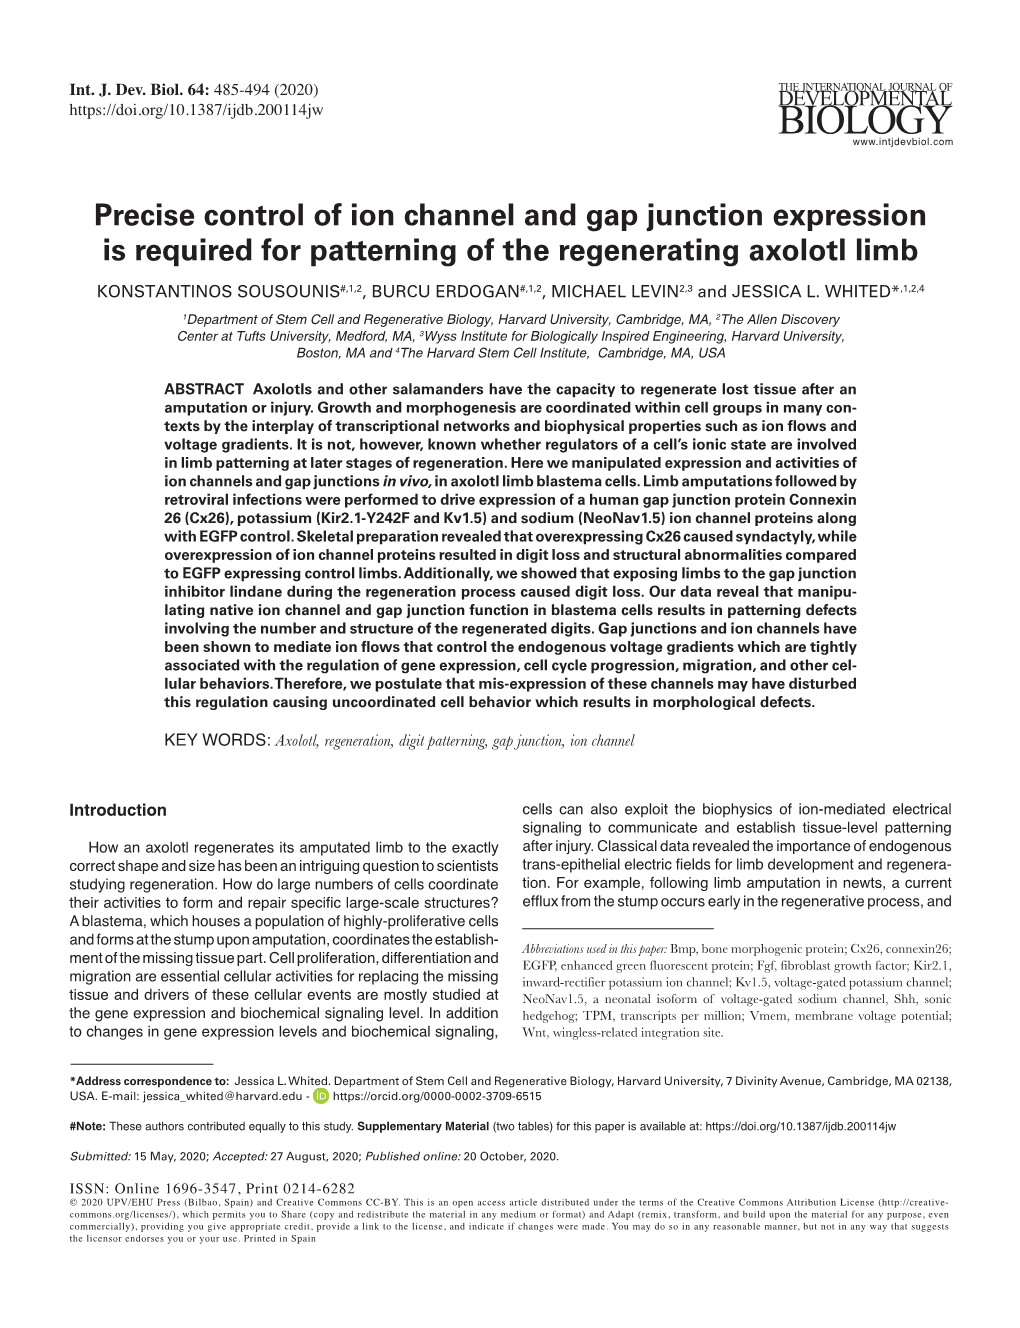 Precise Control of Ion Channel and Gap Junction Expression Is Required For